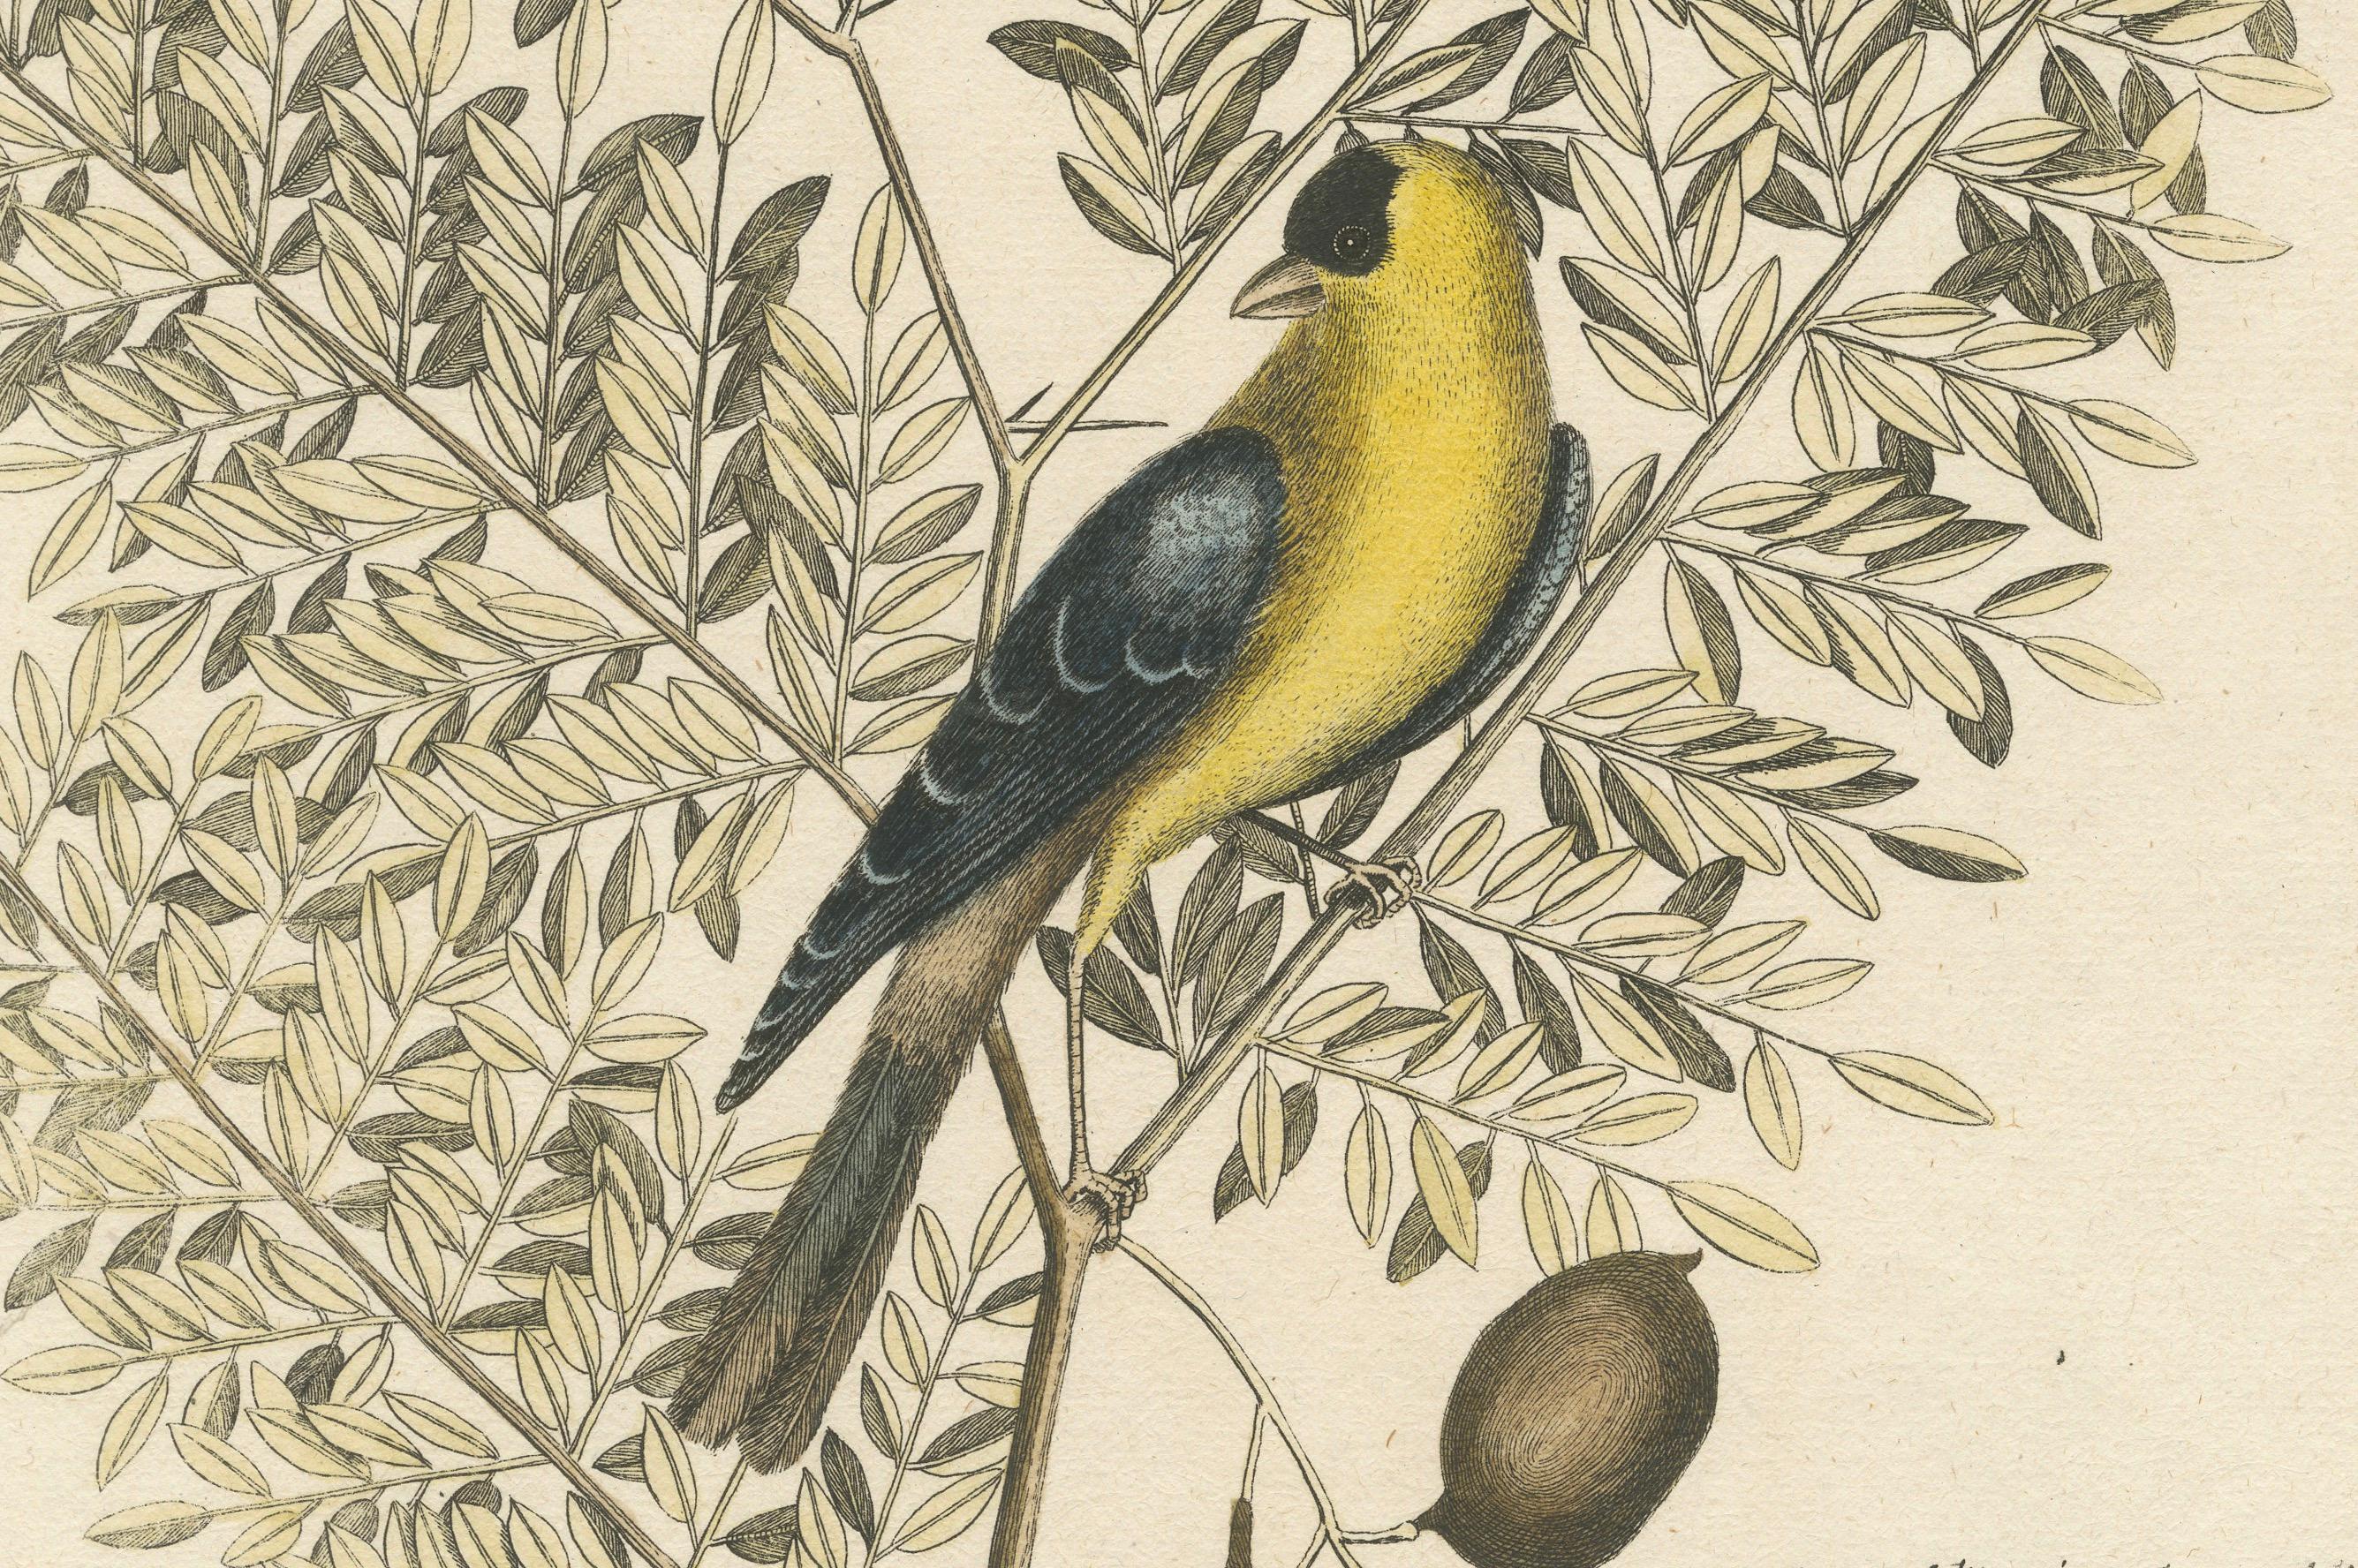 Paper Bird Print of an American Goldfinch on a Branch Engraved and Hand-Colored, 1749 For Sale